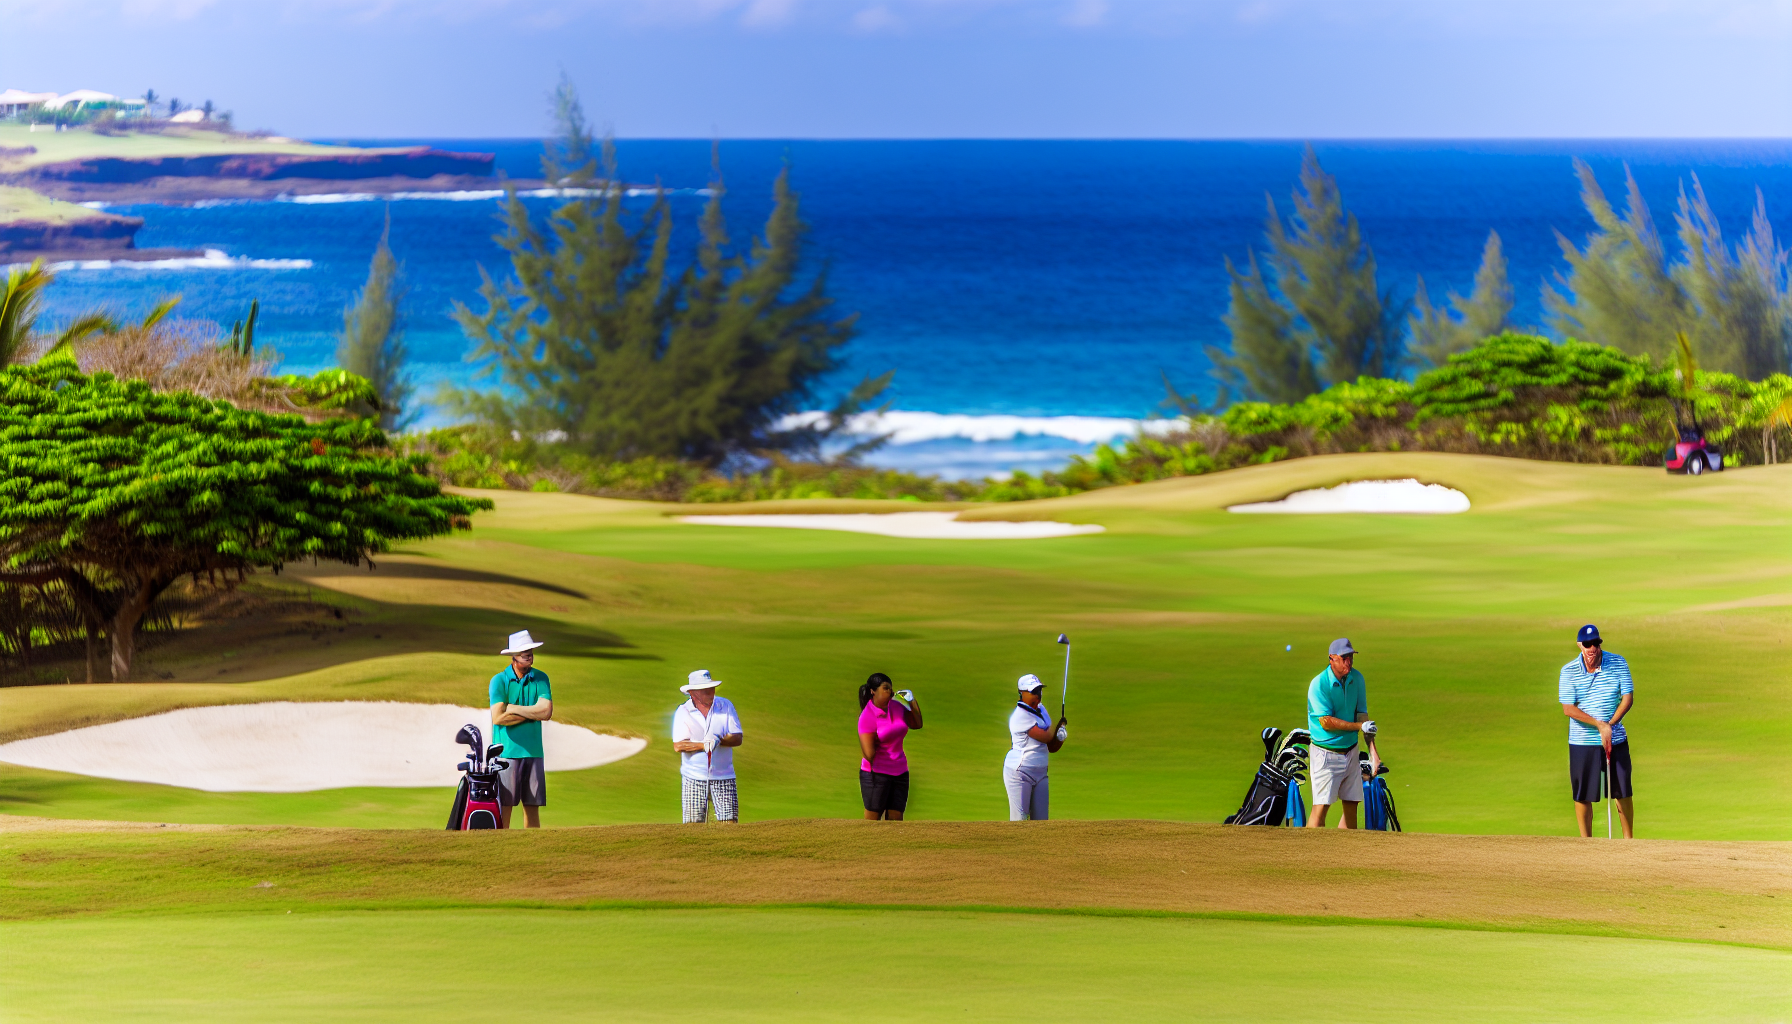 Golfers enjoying a round at the scenic La Iguana Golf Course overlooking the ocean